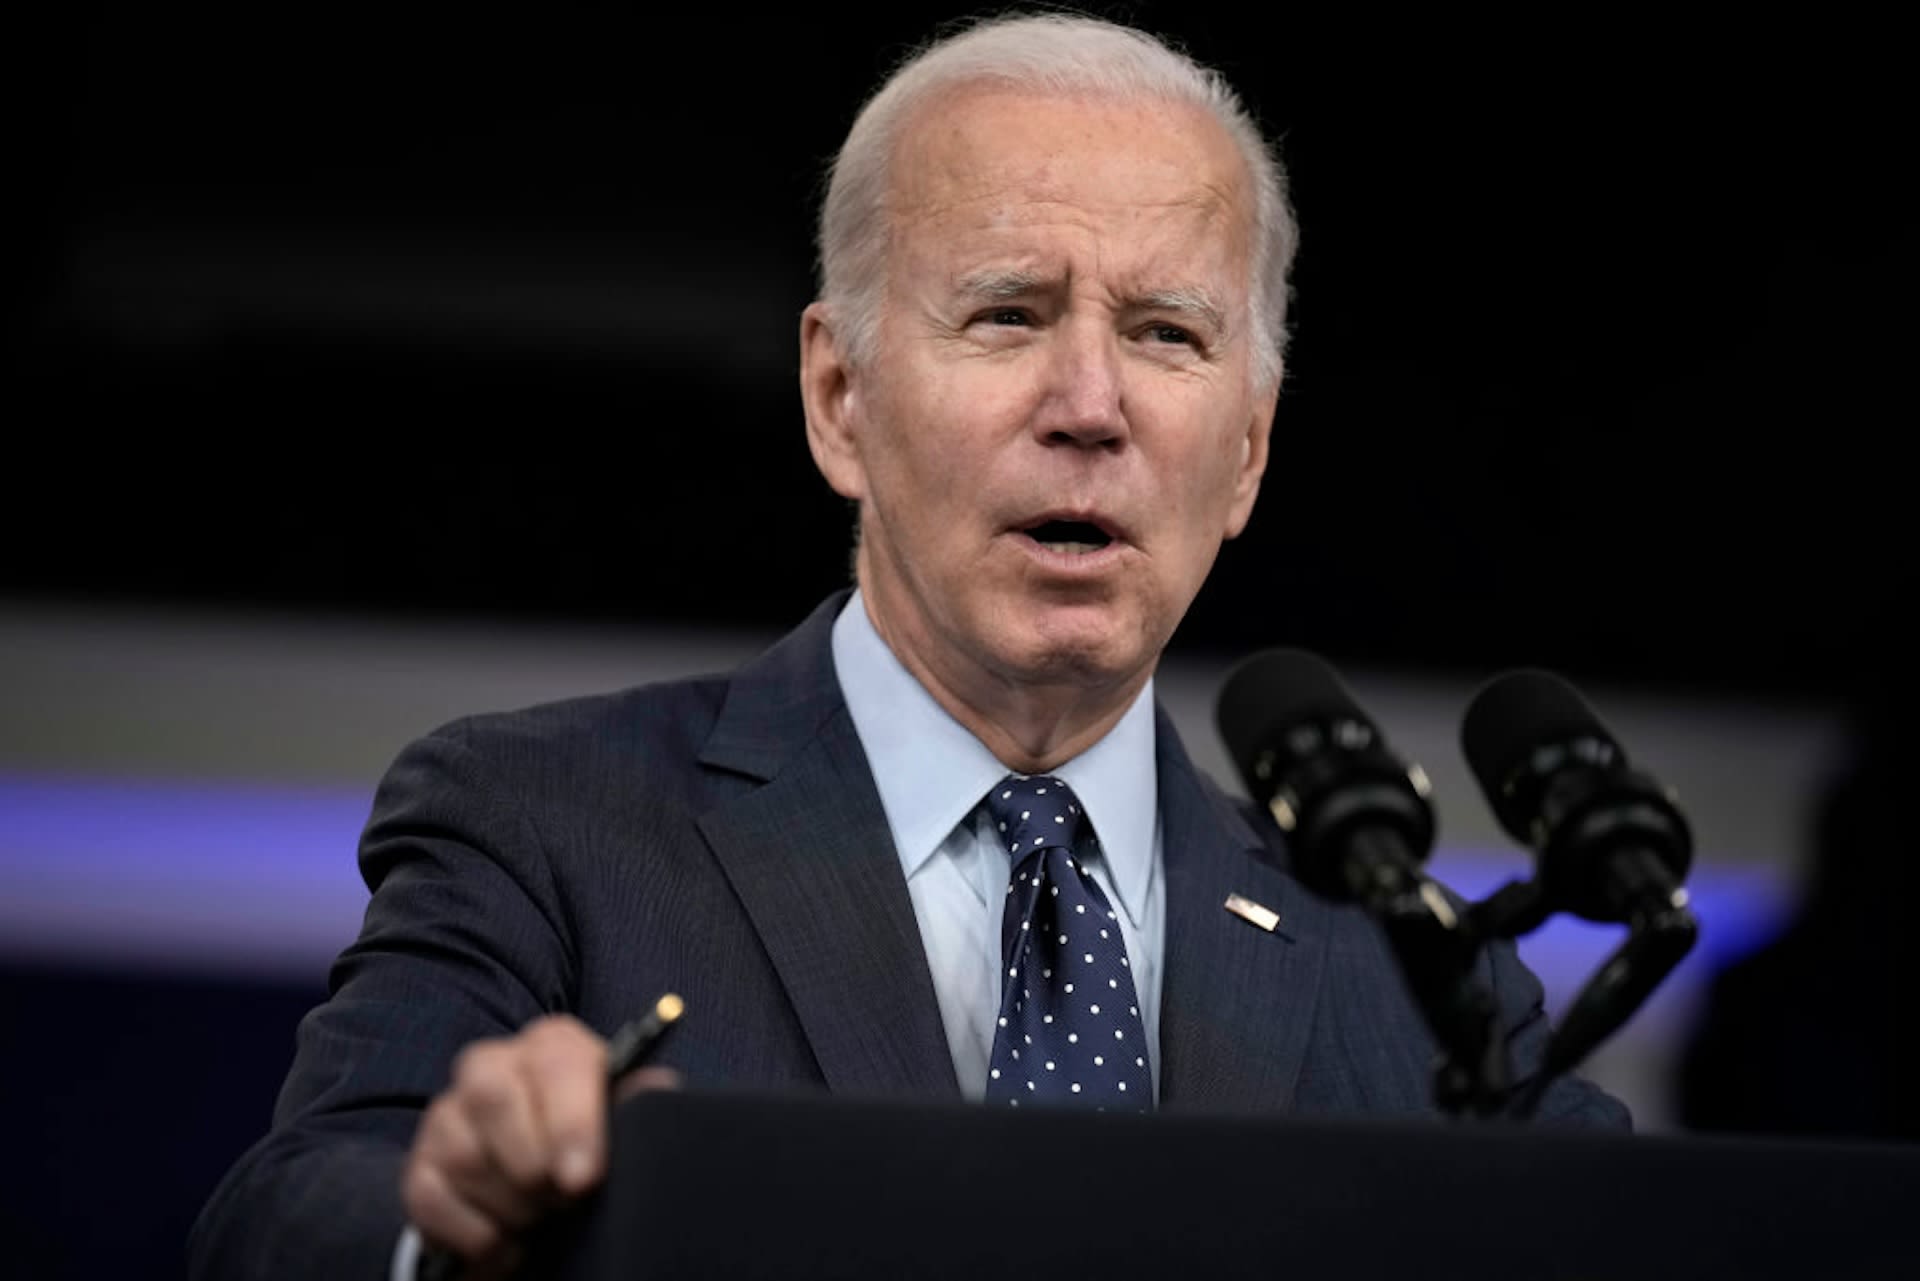 Biden imposes steep tariffs on important green technologies from China: 'The president is taking a tough strategic approach'